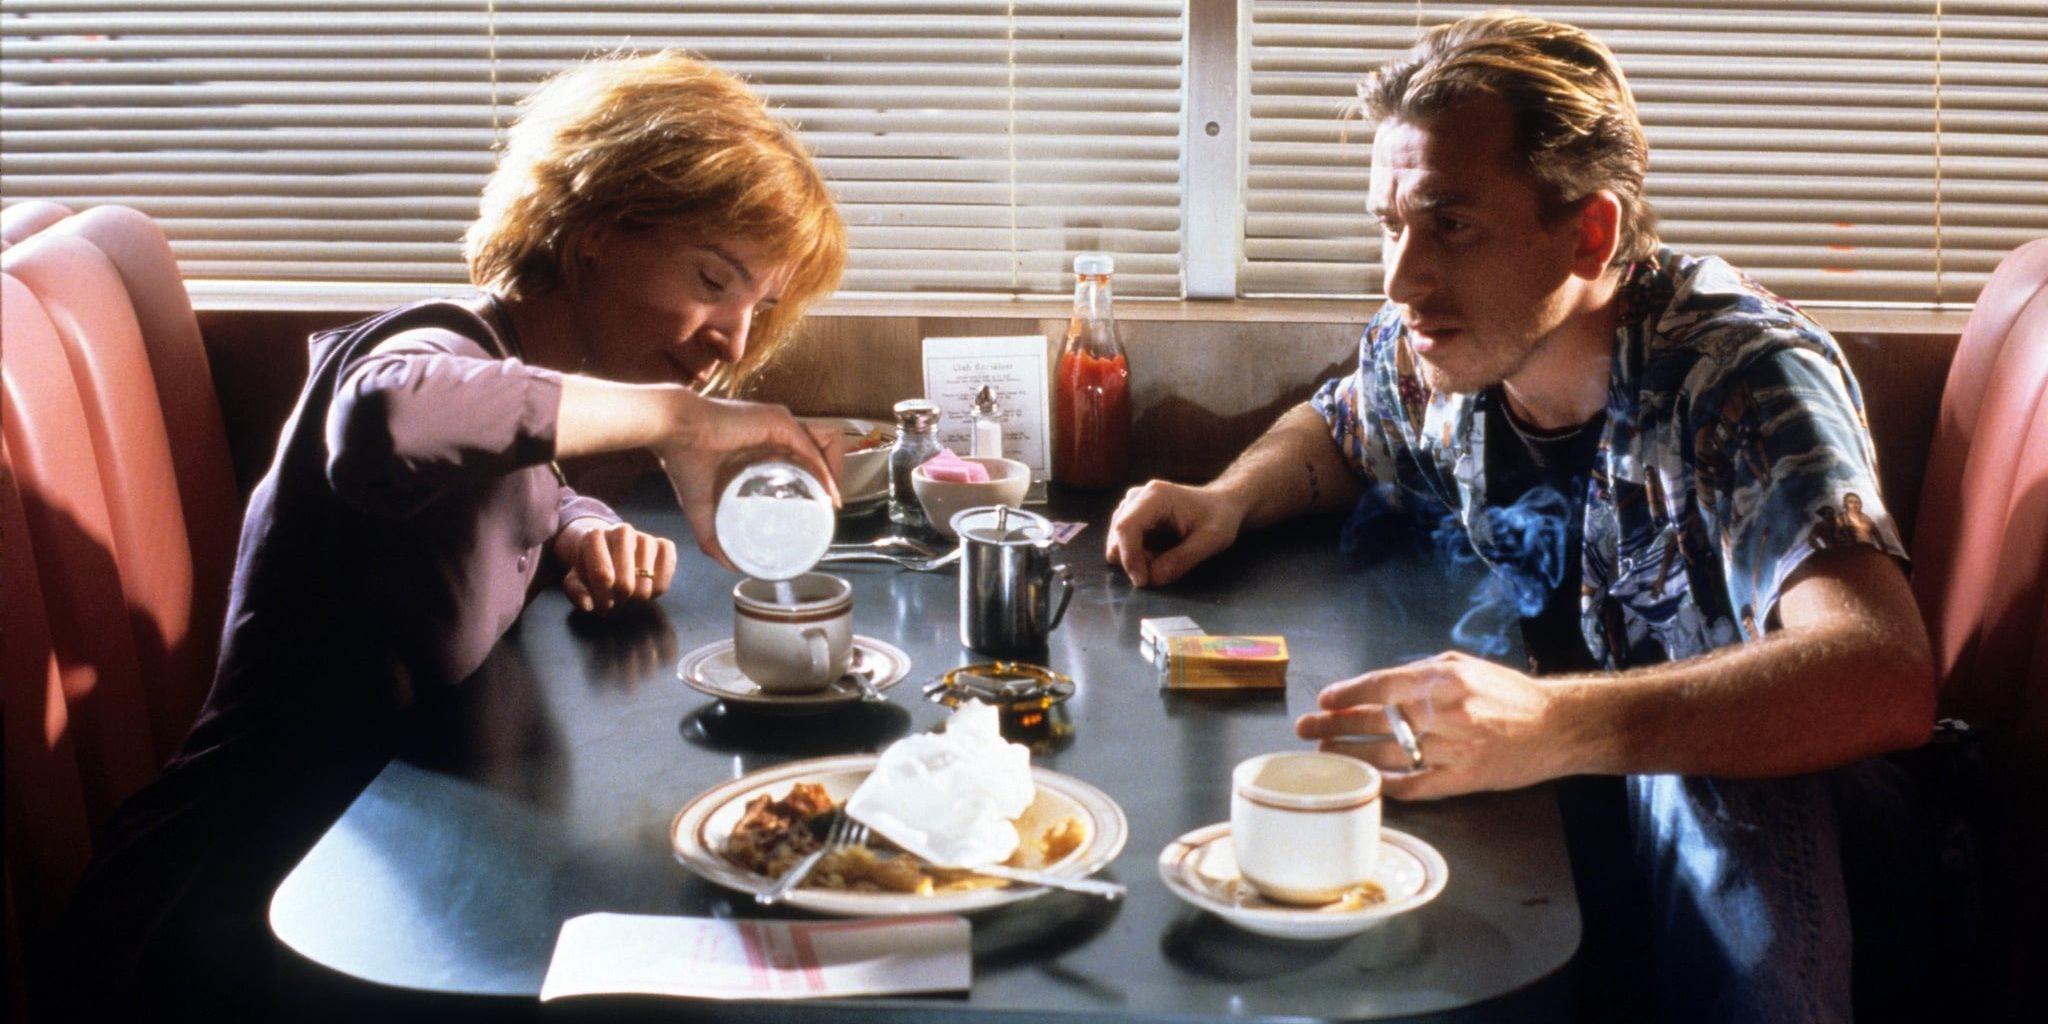 5 Pulp Fiction Characters Who Would Make Great Roommates (& 5 Who Would Be The Worst)